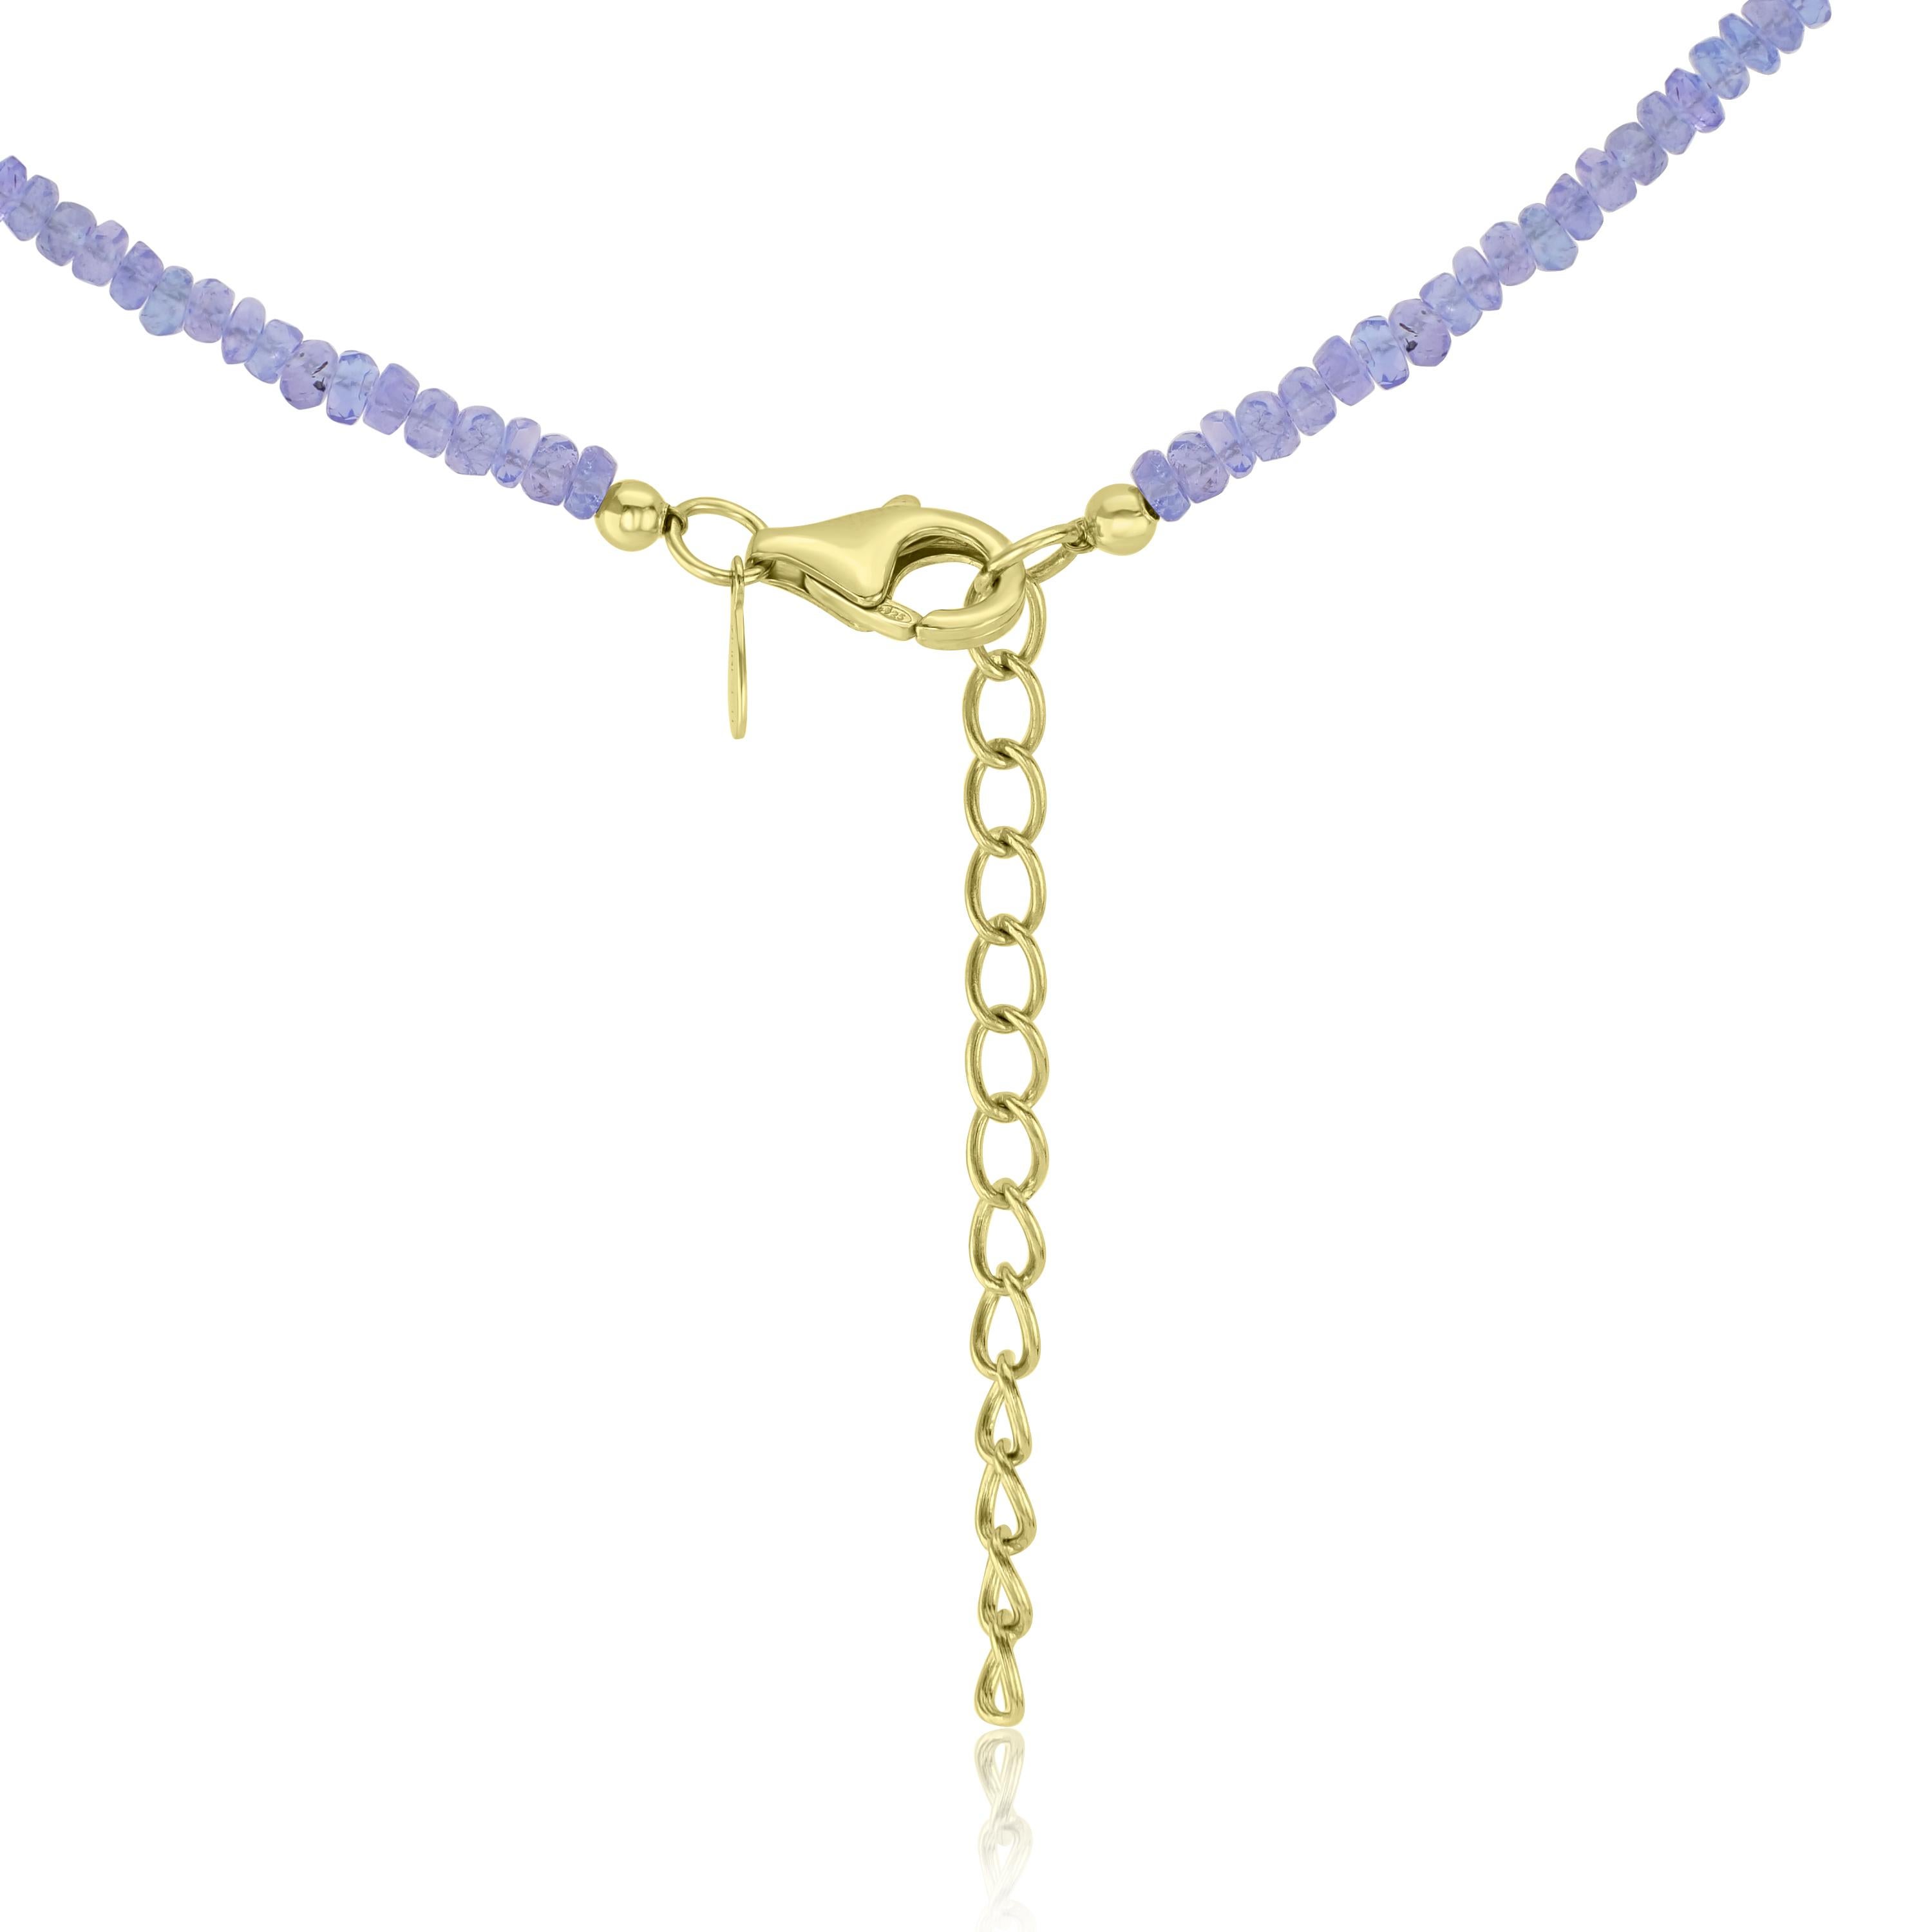 Gemistry 56.57 Carat Tanzanite Beads Necklace in 925 Sterling Silver In New Condition For Sale In New York, NY